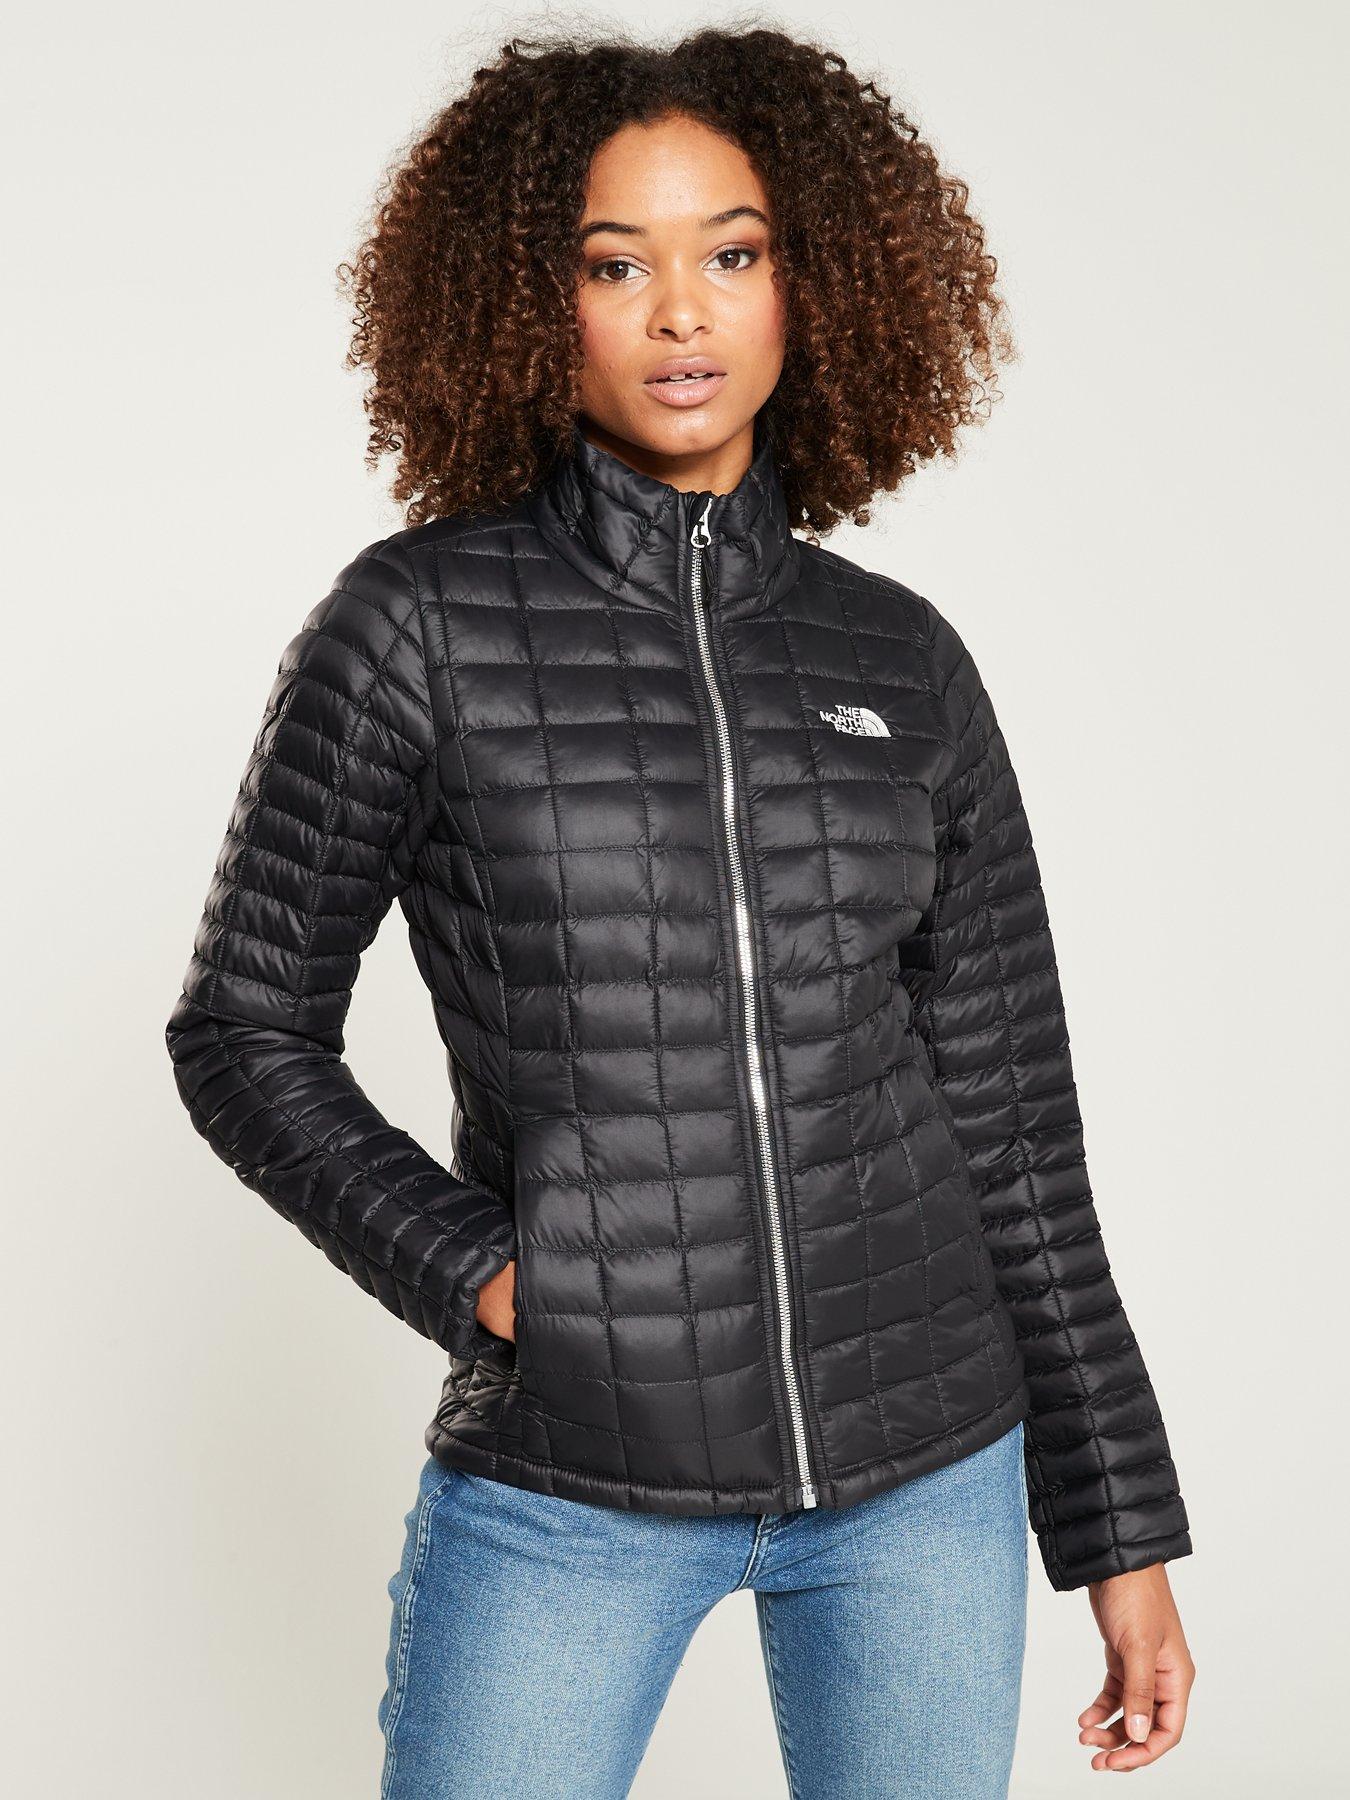 thermoball full zip jacket